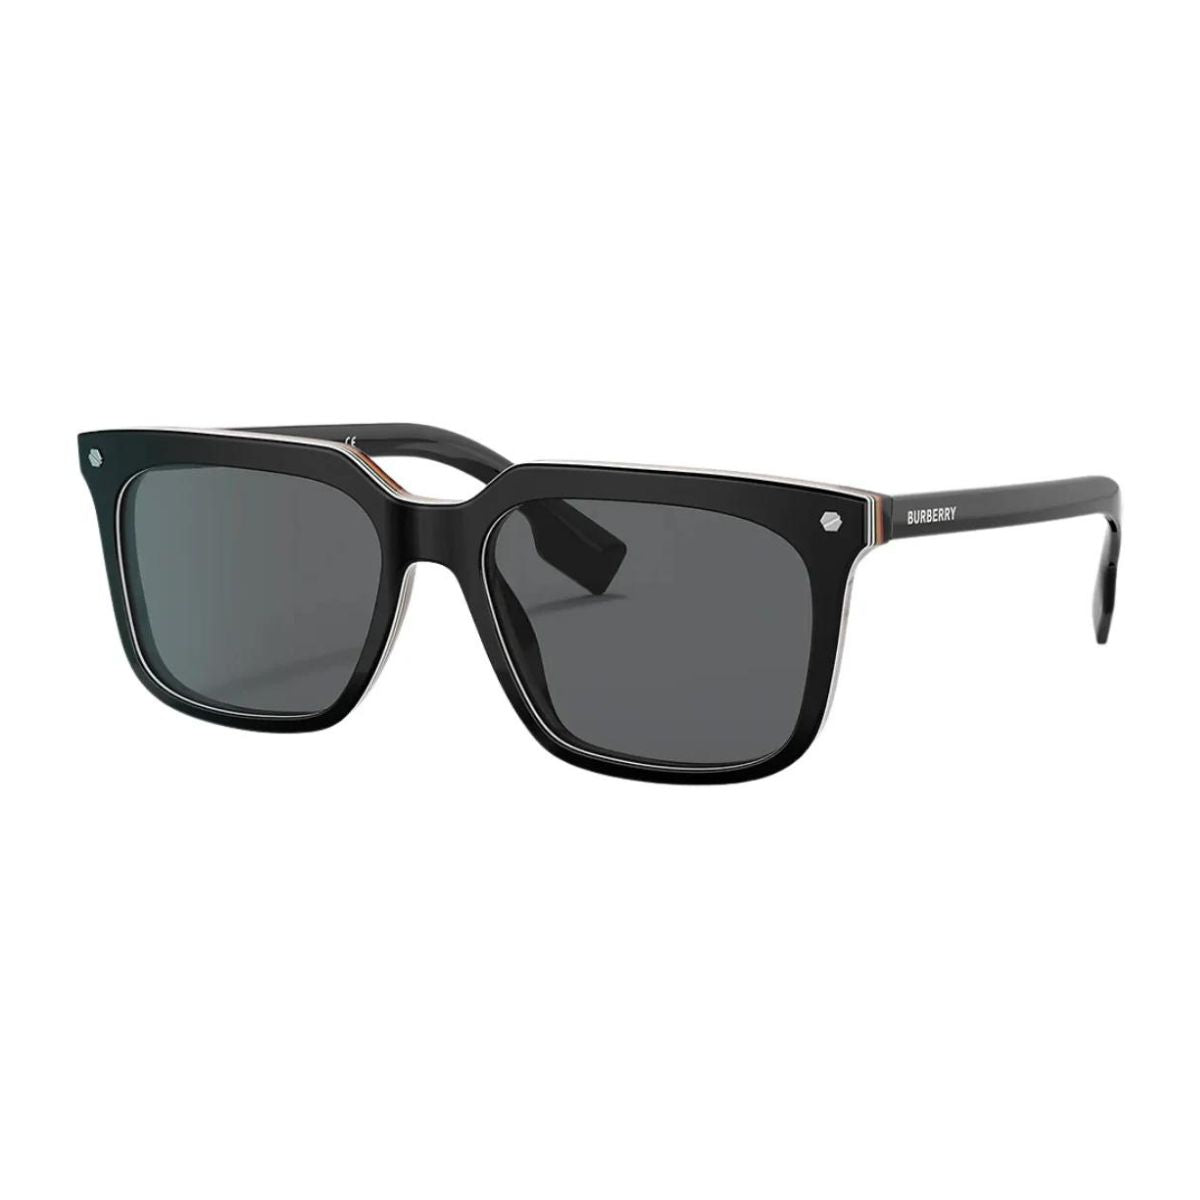 "Burberry 4337 3798/87  Square UV Protection Sunglasses For Men and Women At Optorium"